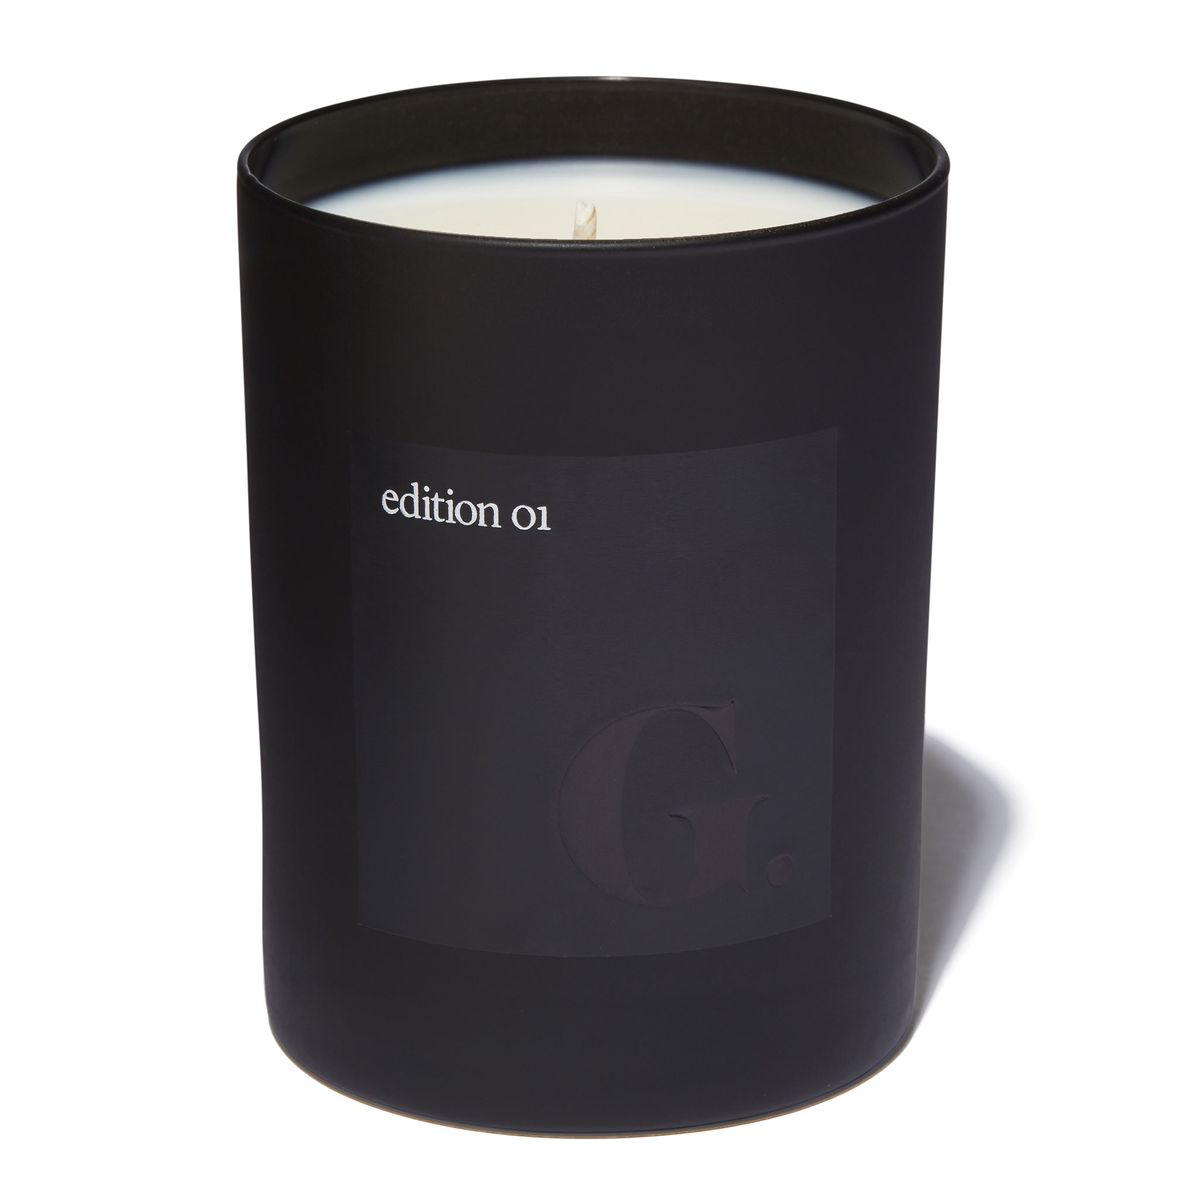 Goop Edition 01 - Winter candle in a black jar